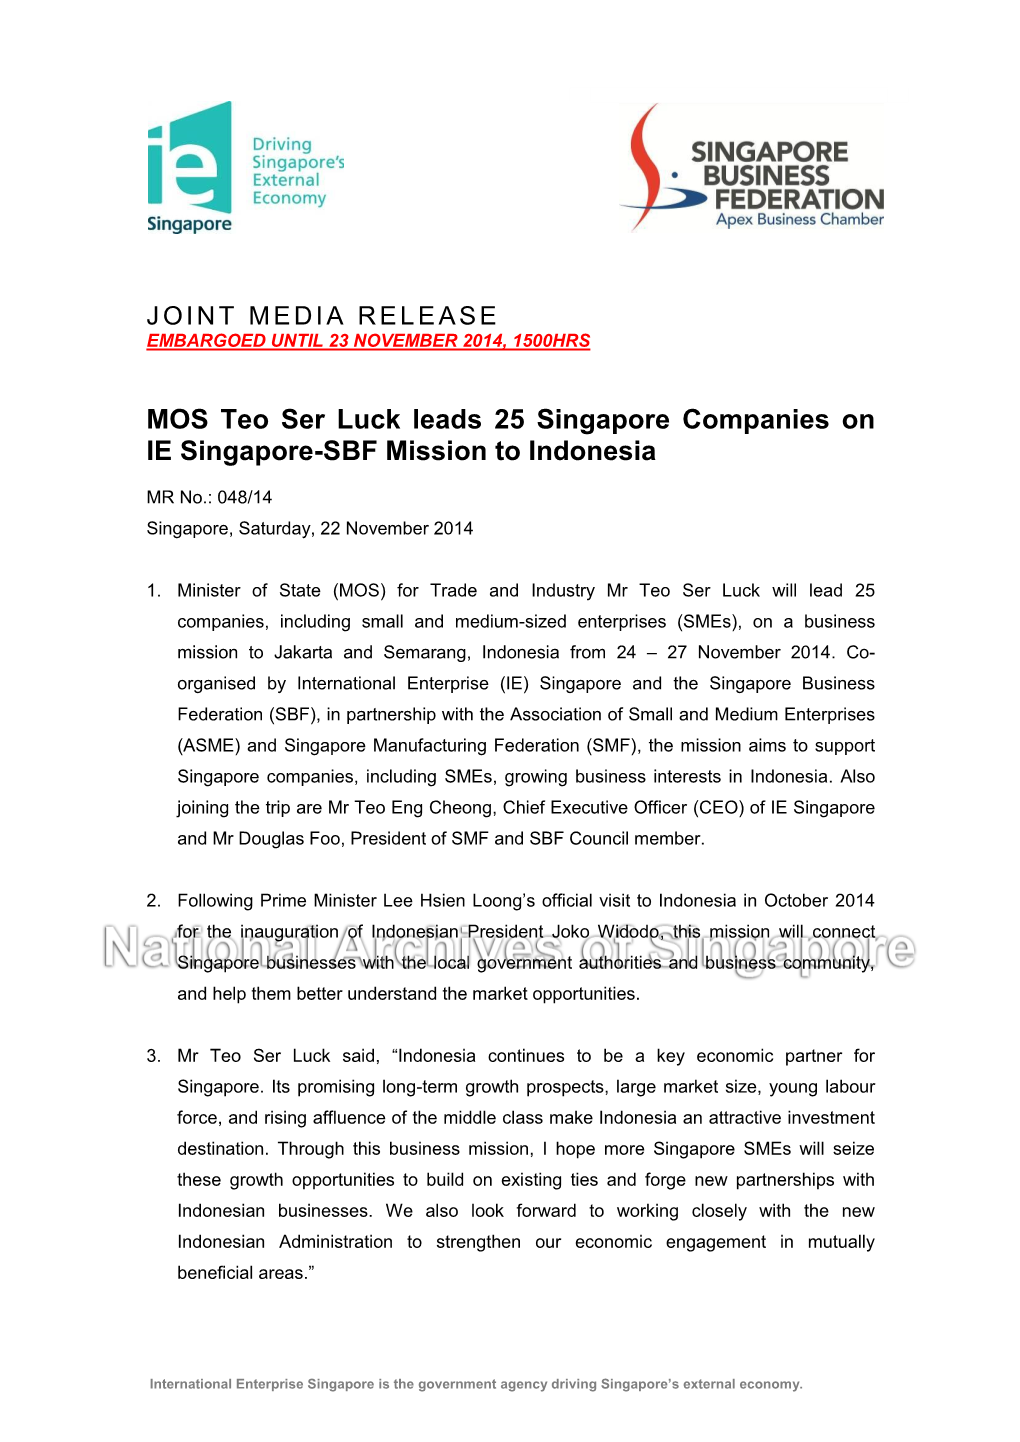 MOS Teo Ser Luck Leads 25 Singapore Companies on IE Singapore-SBF Mission to Indonesia